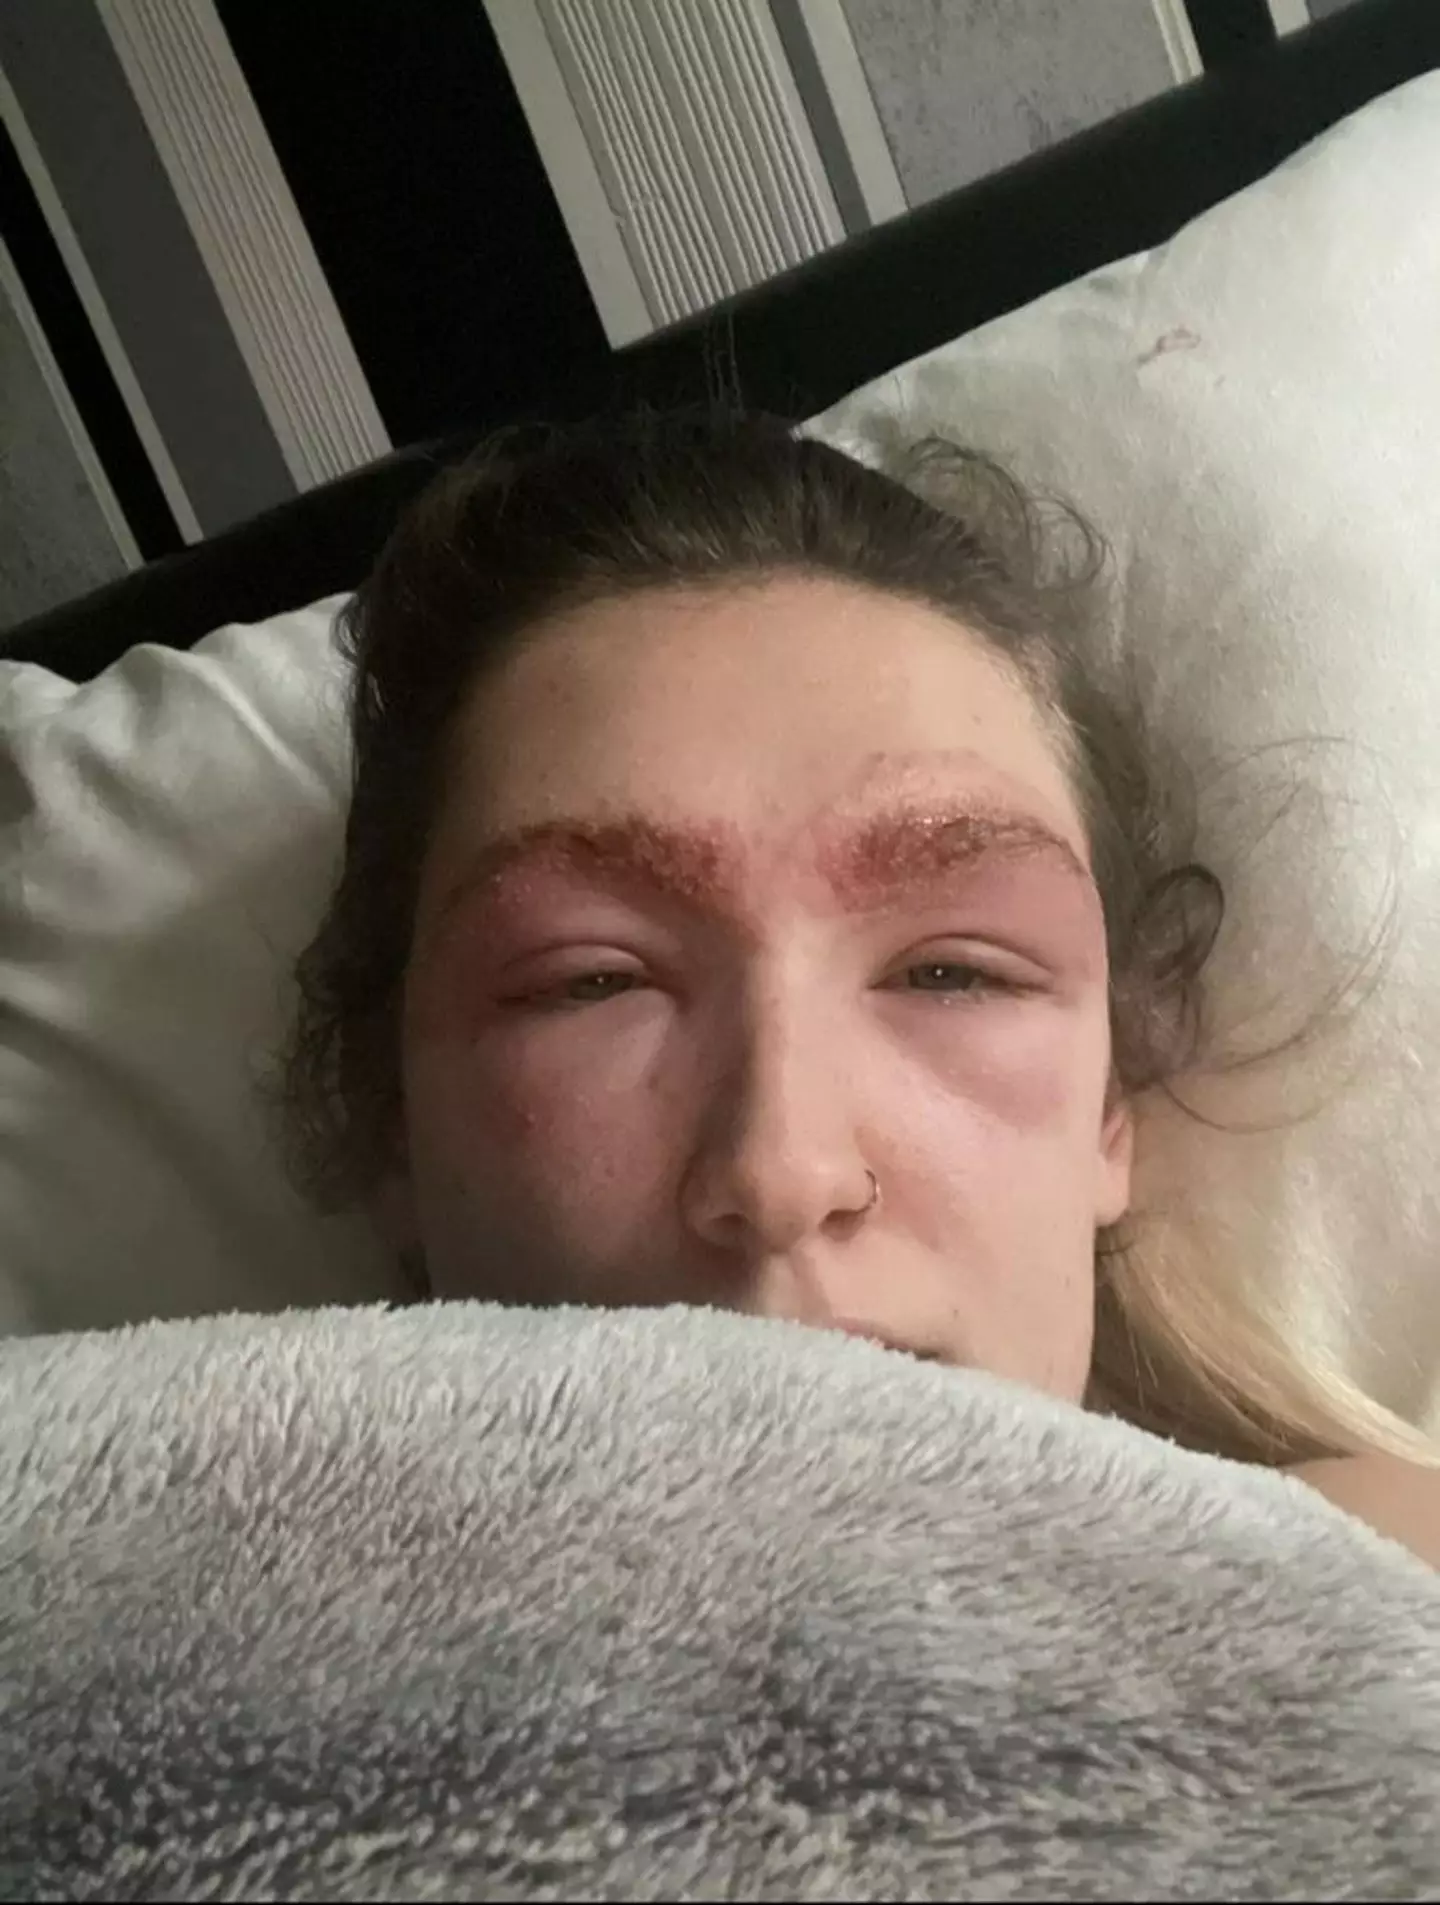 Megan was rushed to hospital when she could no longer see due to the swelling.